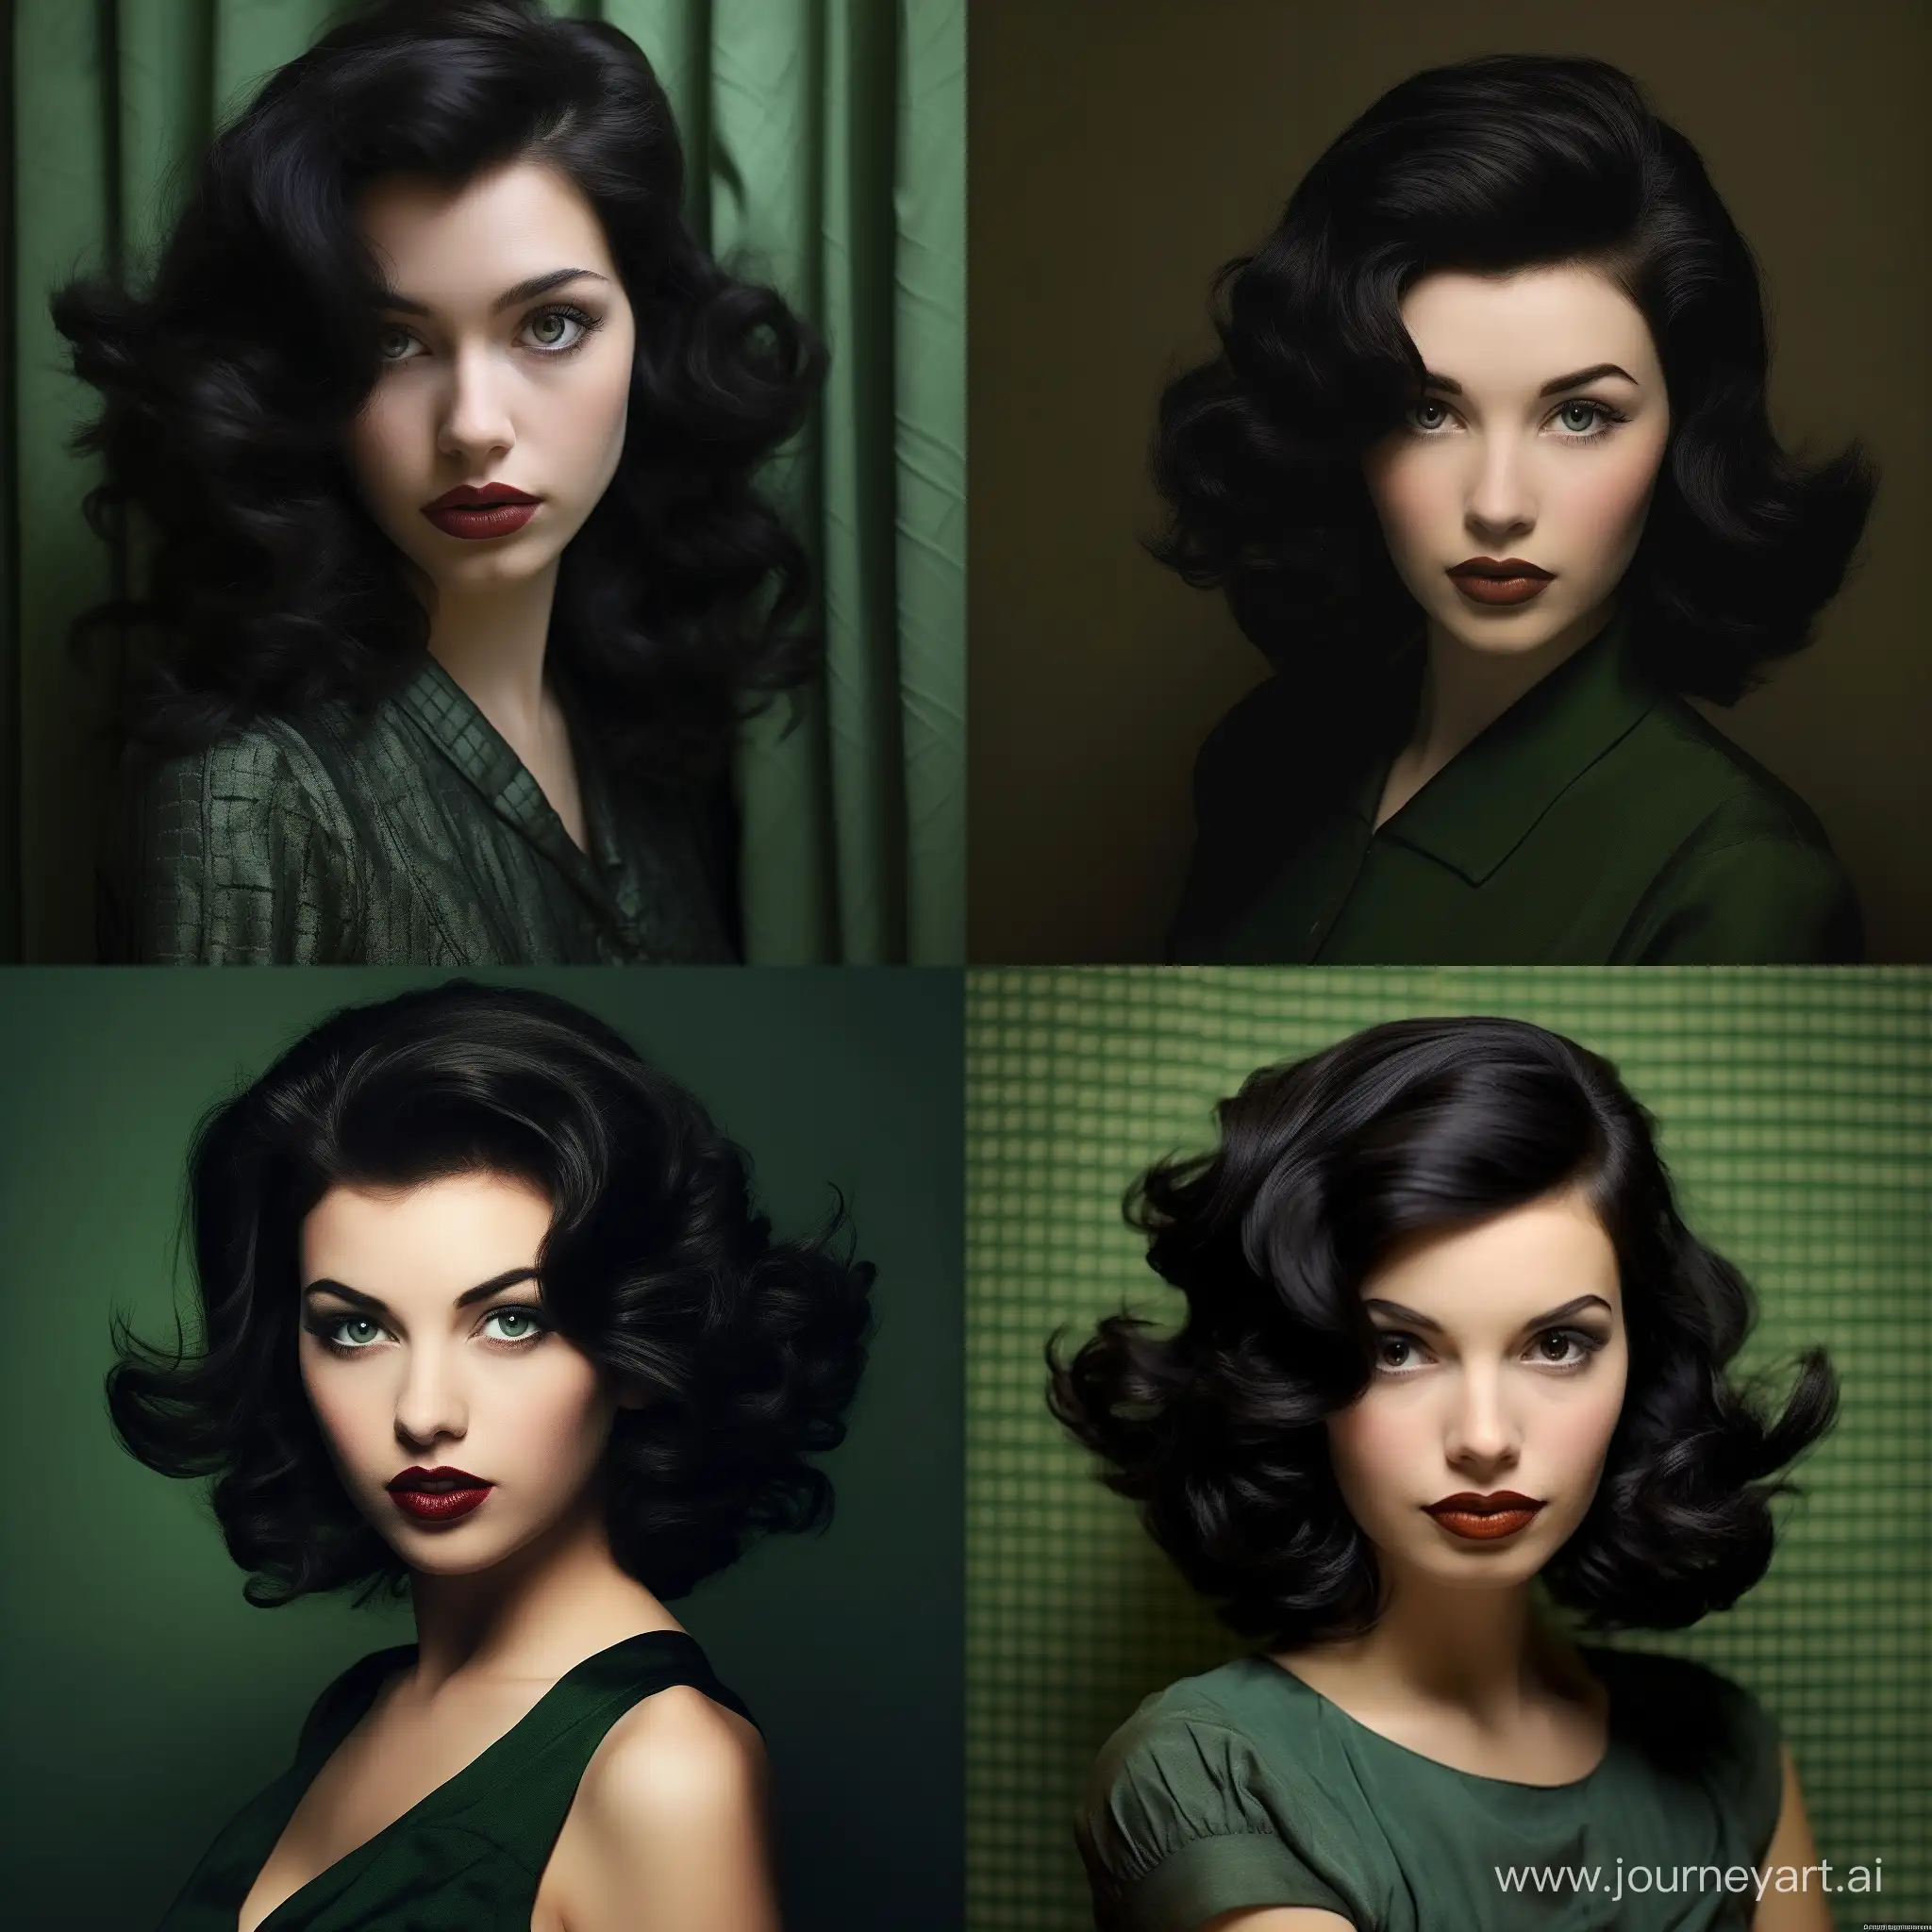 1940s-American-Girl-with-Black-Hair-and-Green-Eyes-Realistic-Photo-Art